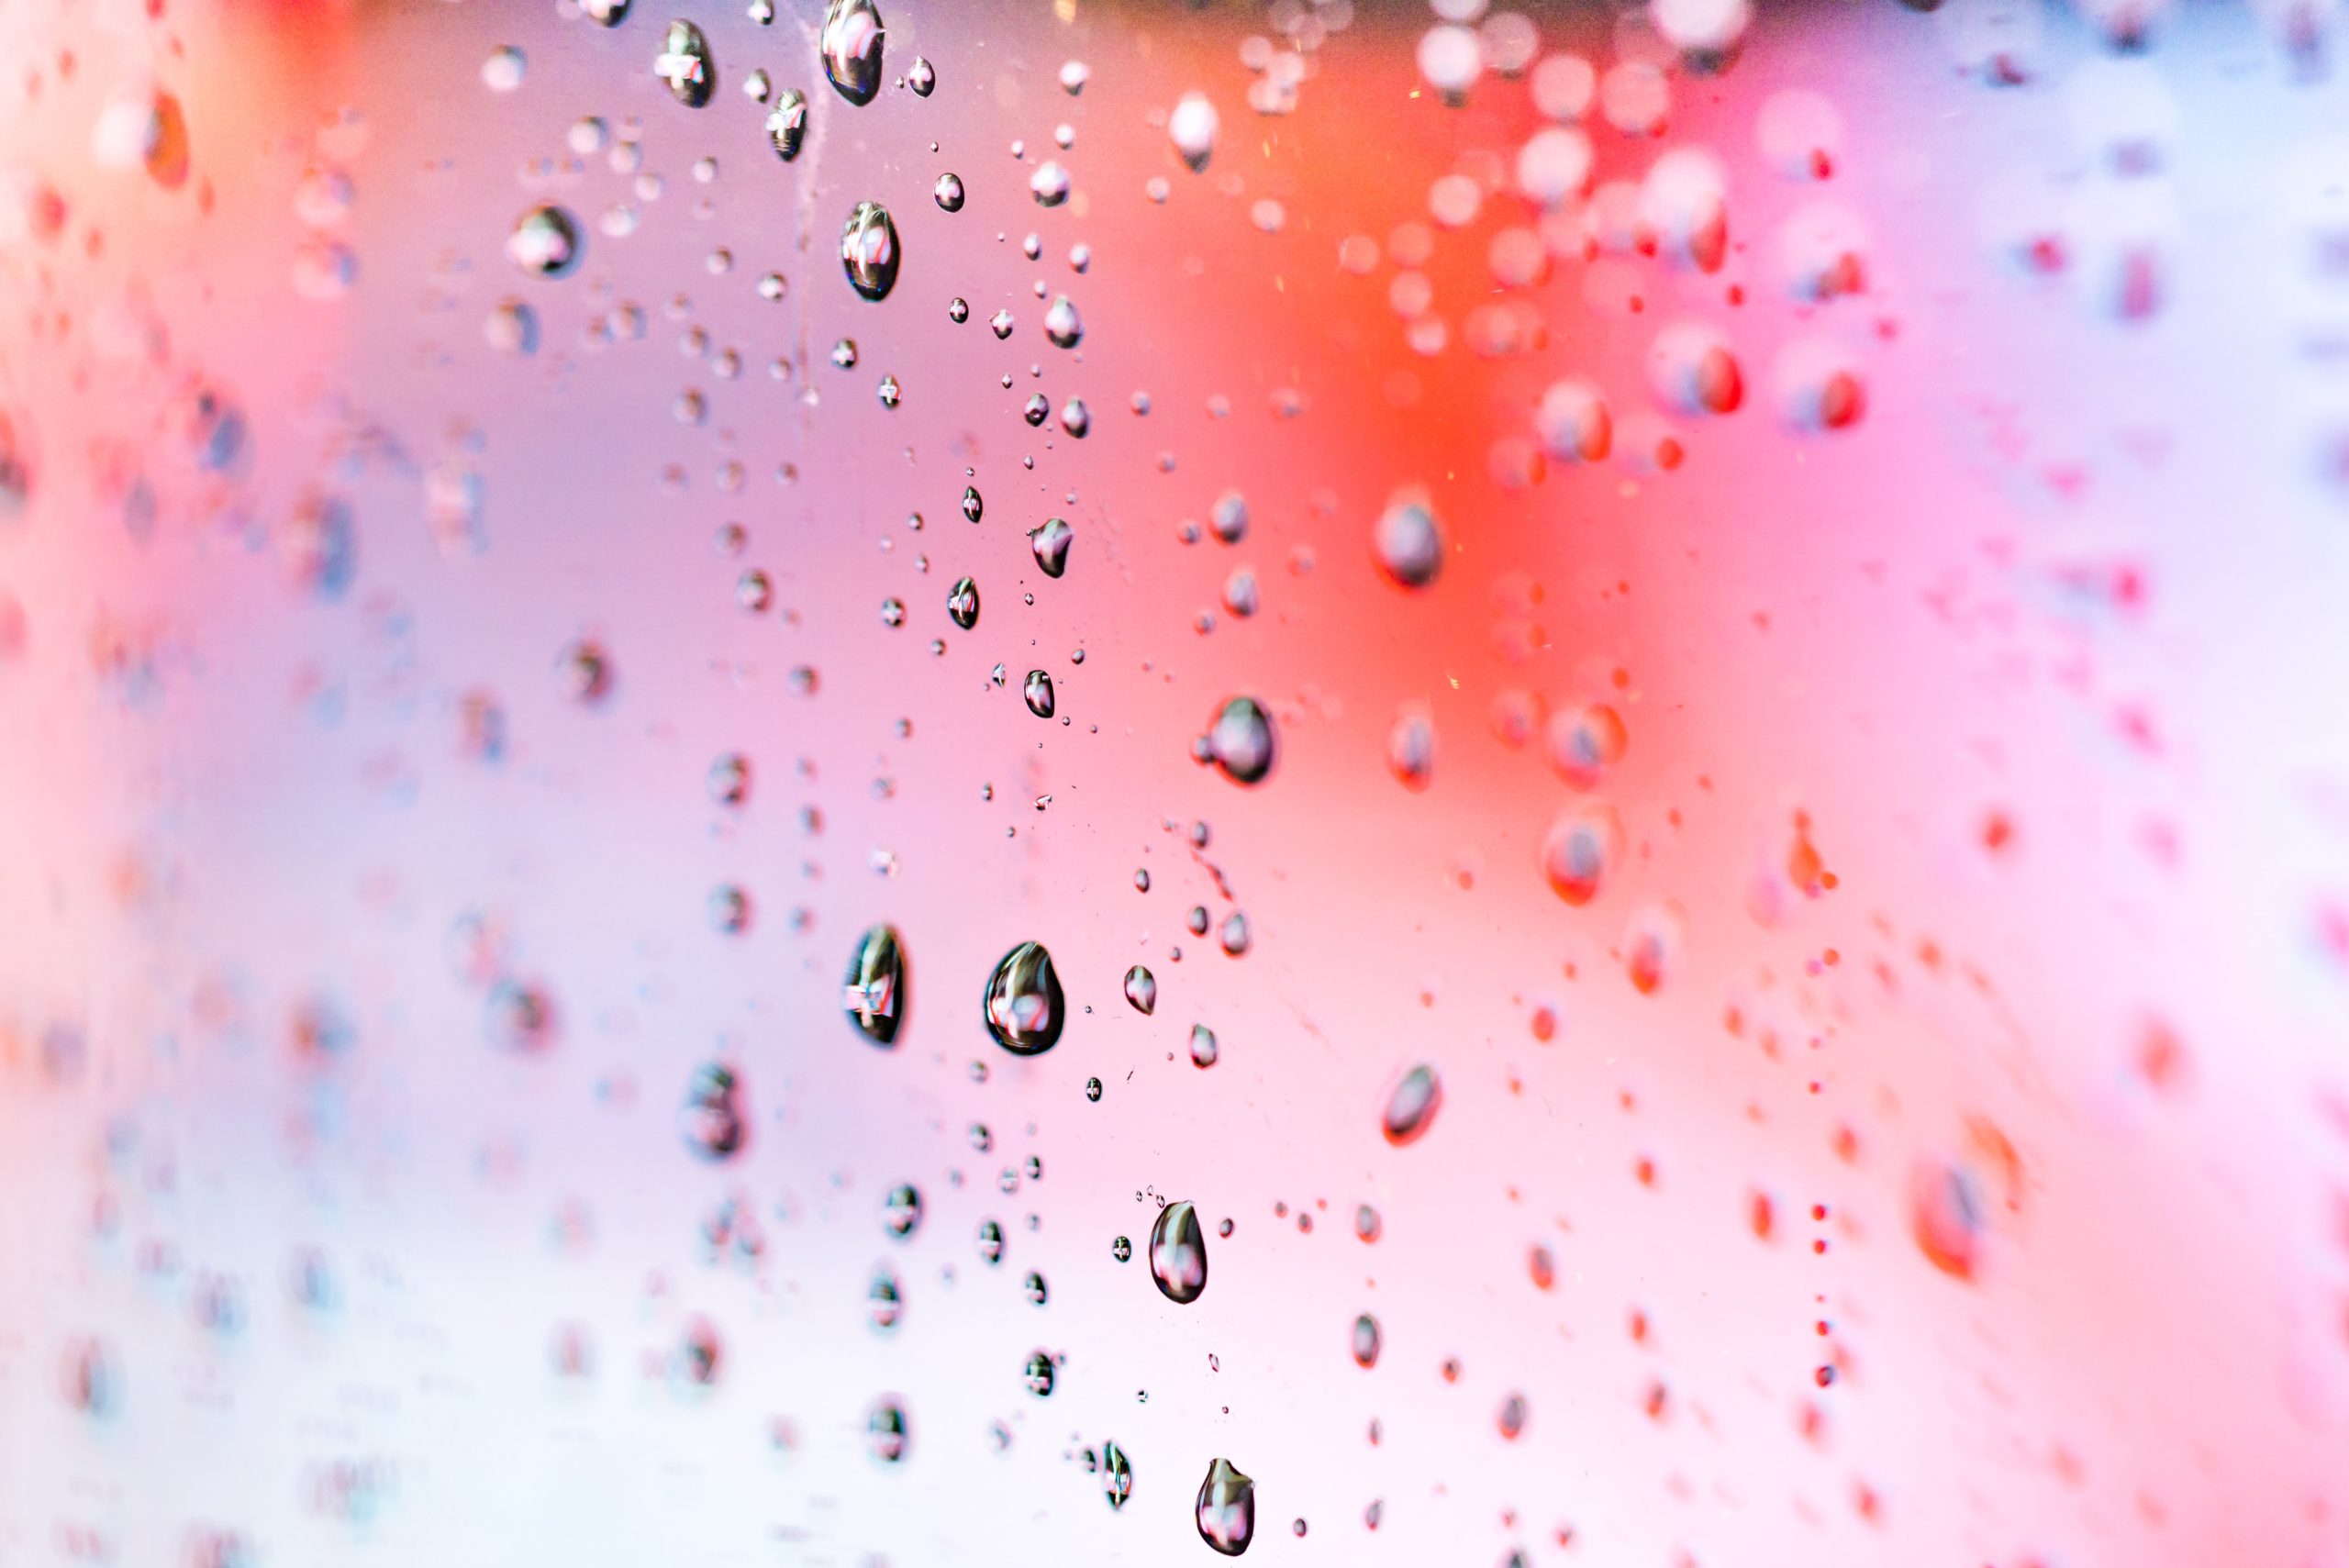 Raindrops rolling down a red, purple and pink reflective screen